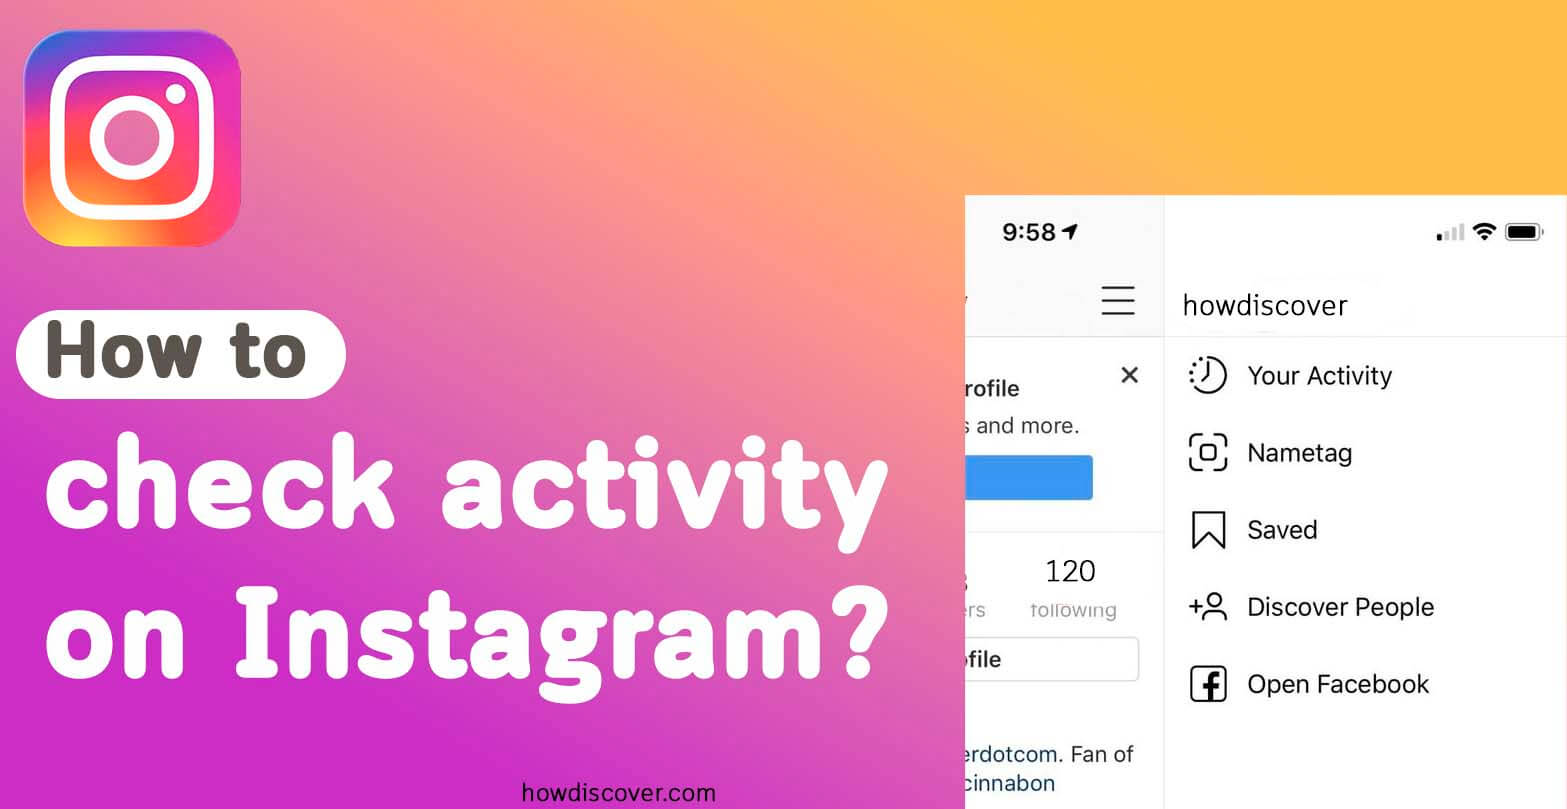 how to check activity on Instagram